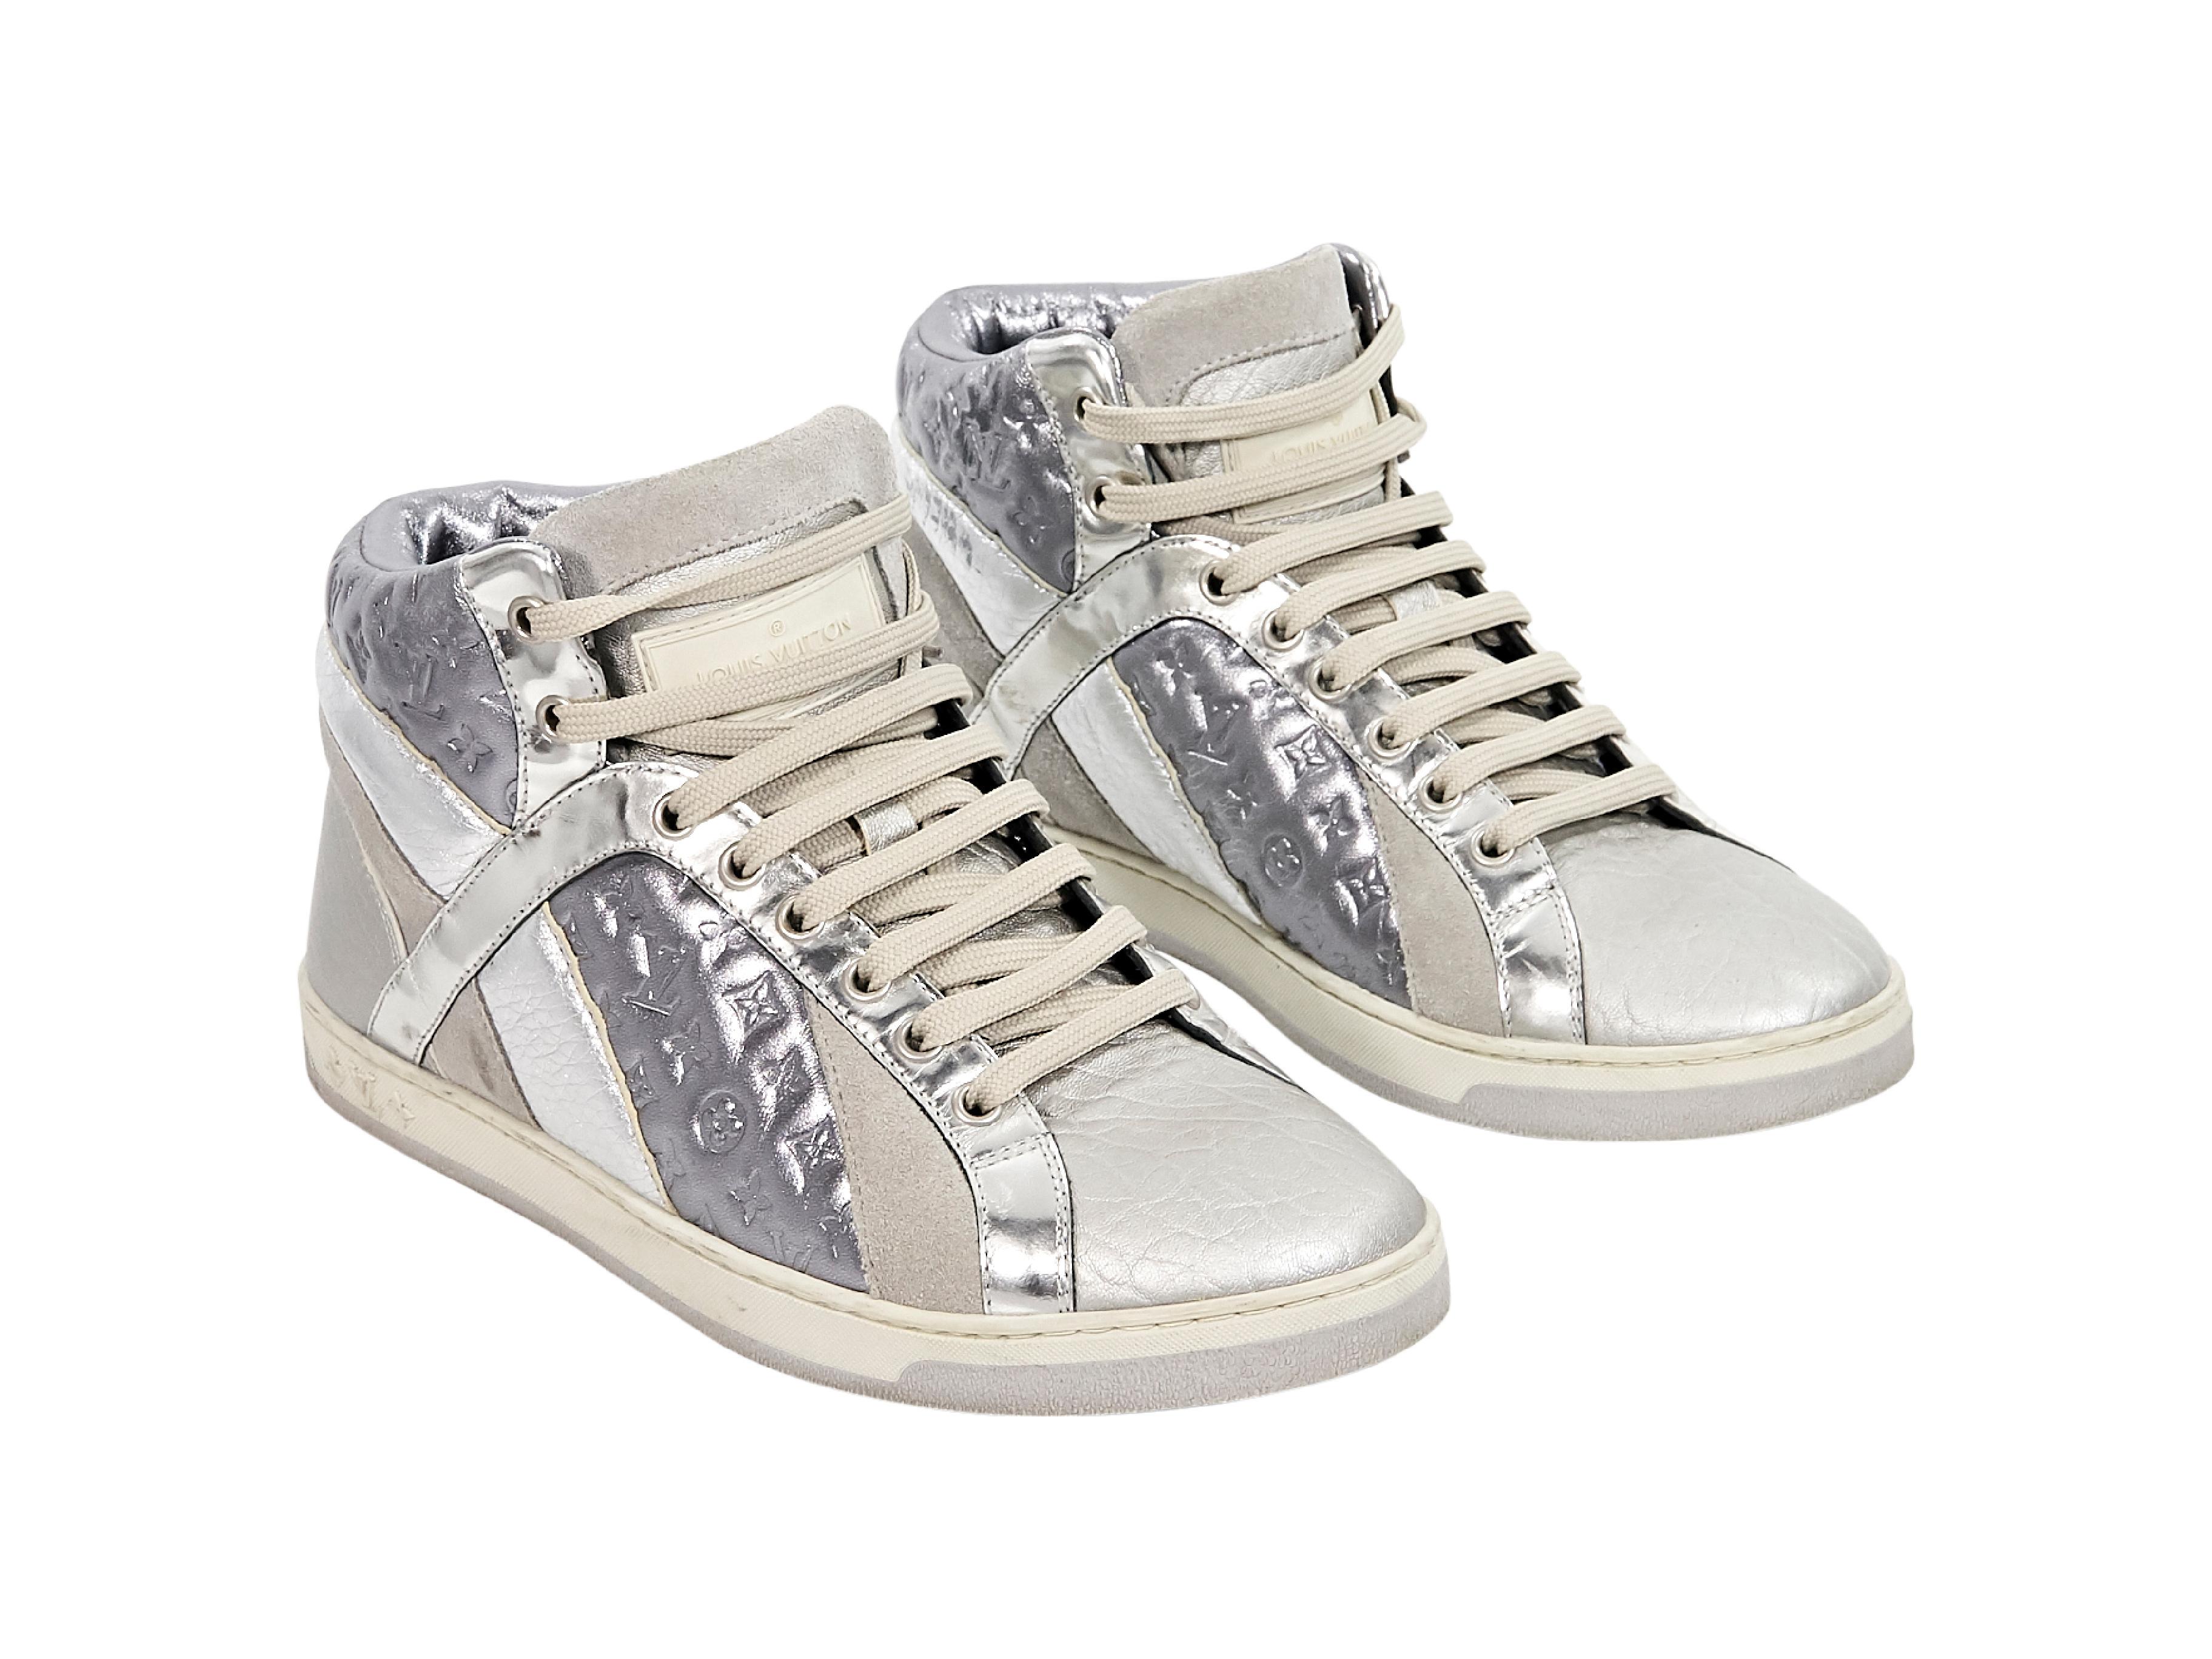 Product details:  Metallic silver high-top sneakers by Louis Vuitton.  Accented with monogram embossing.  Lace-up closure.  Round toe.  
Condition: Pre-owned. Very good.
Est. Retail $ 895.00